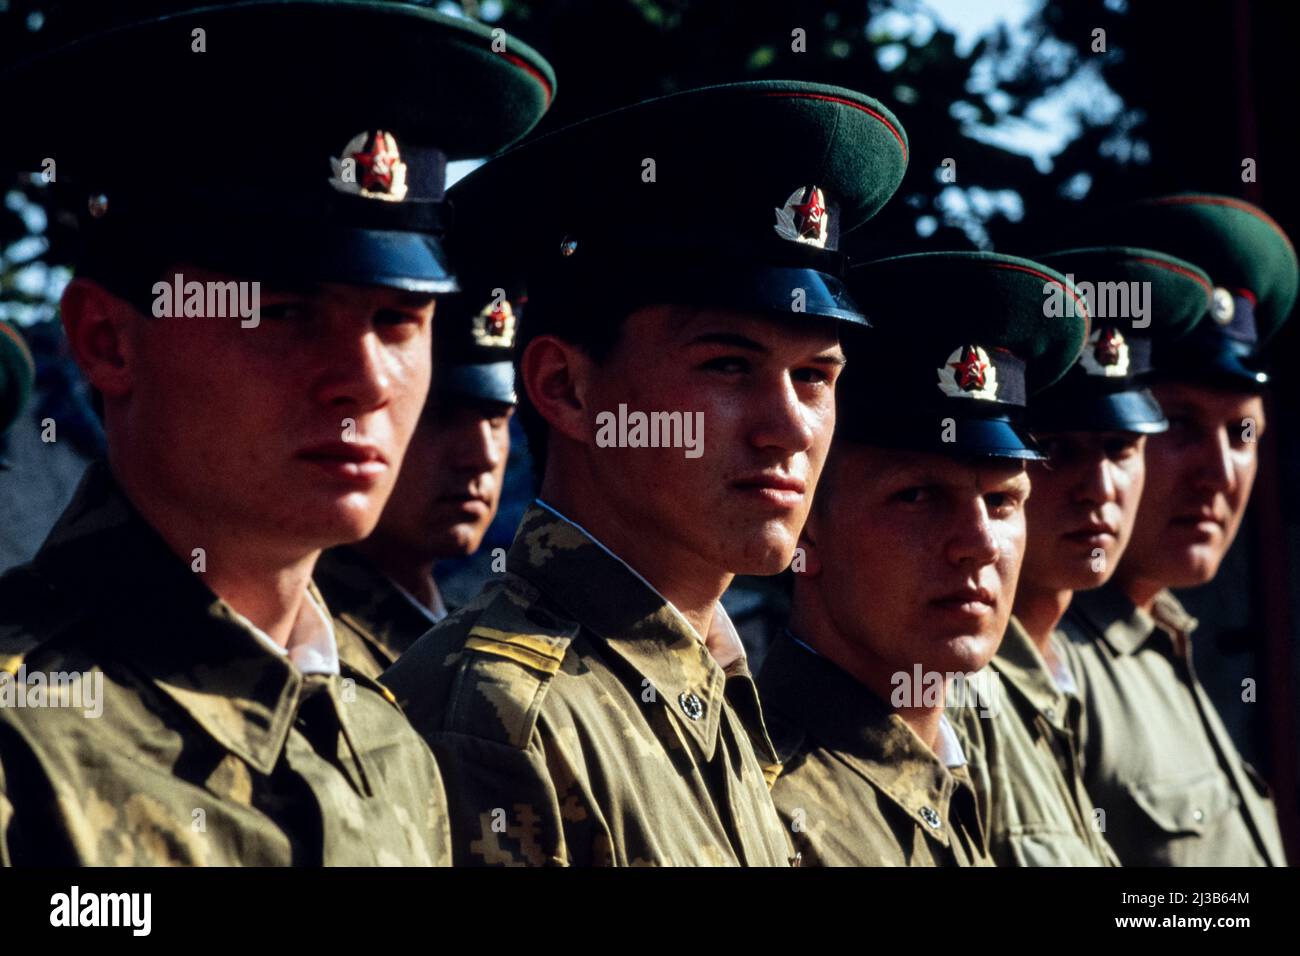 1990 KGB border guards on parade in Gursfuv, the Crimea, USSR, August 1990 Stock Photo